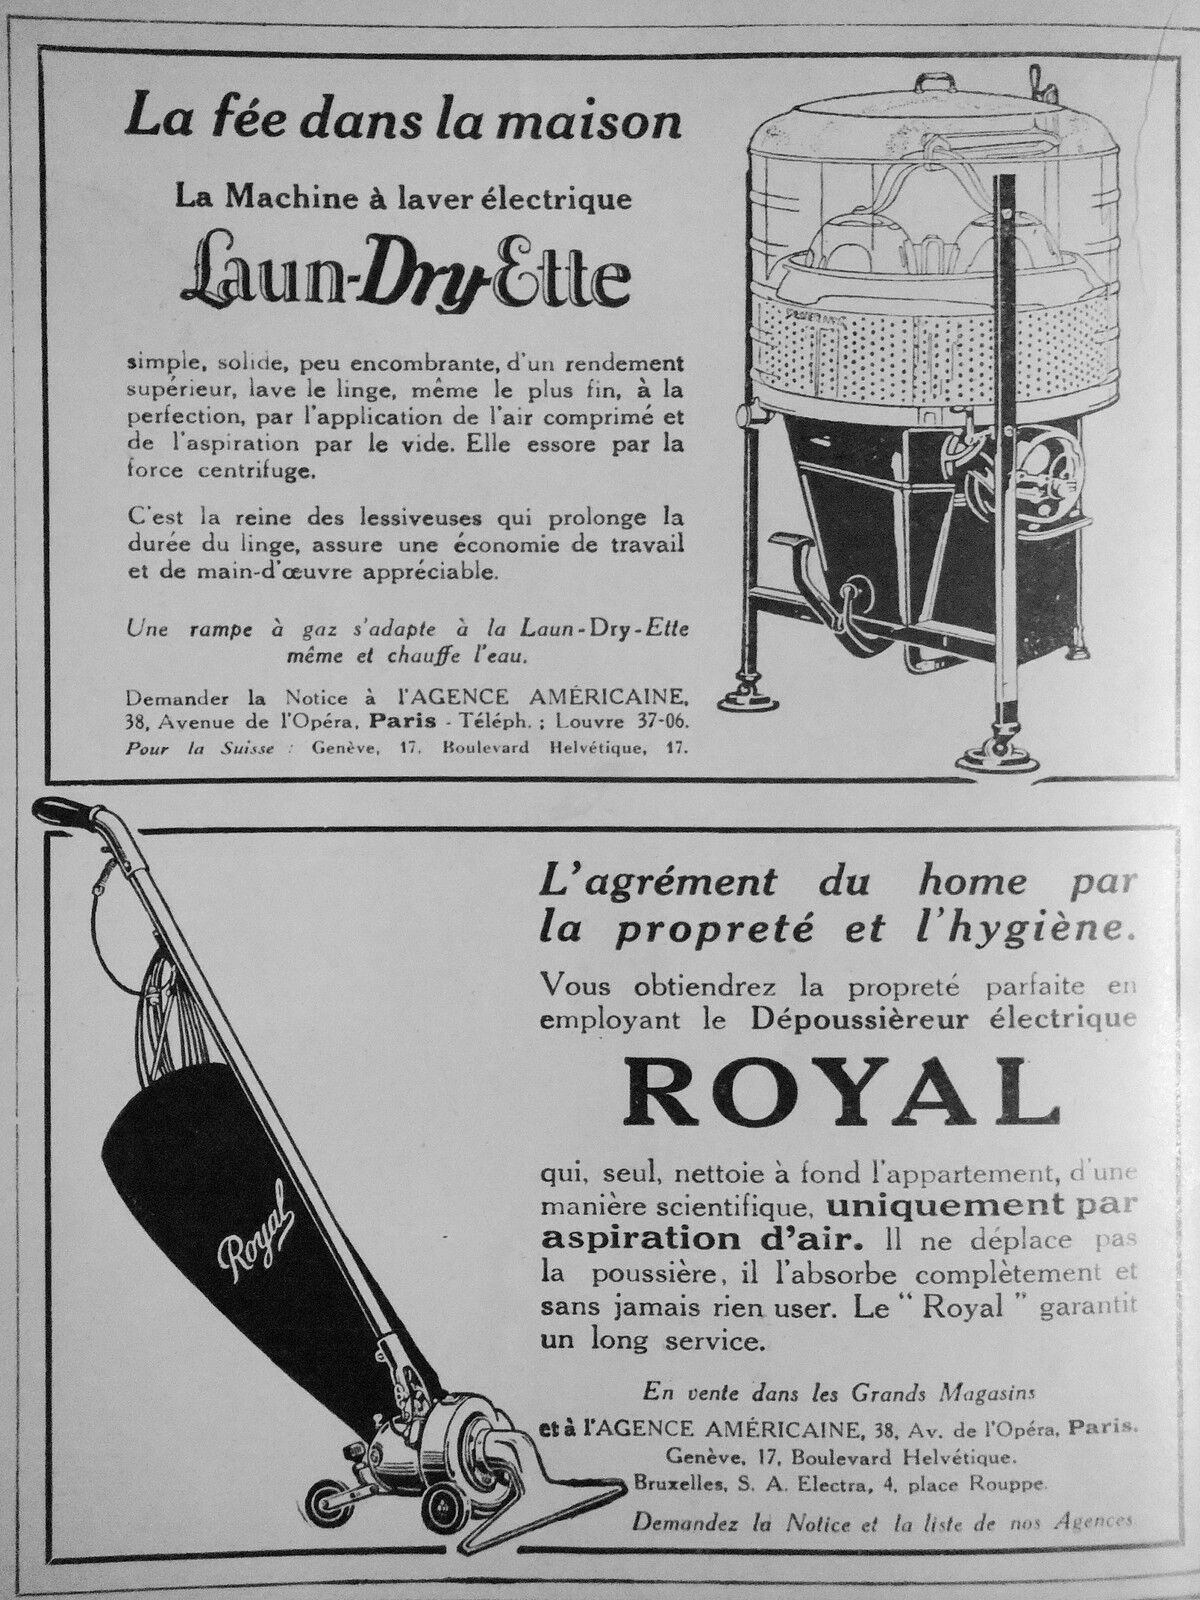 LAUN-DRY-ETTE ELECTRIC WASHING MACHINE ADVERTISING AND ROYAL AMERICAN VACUUM CLEANER